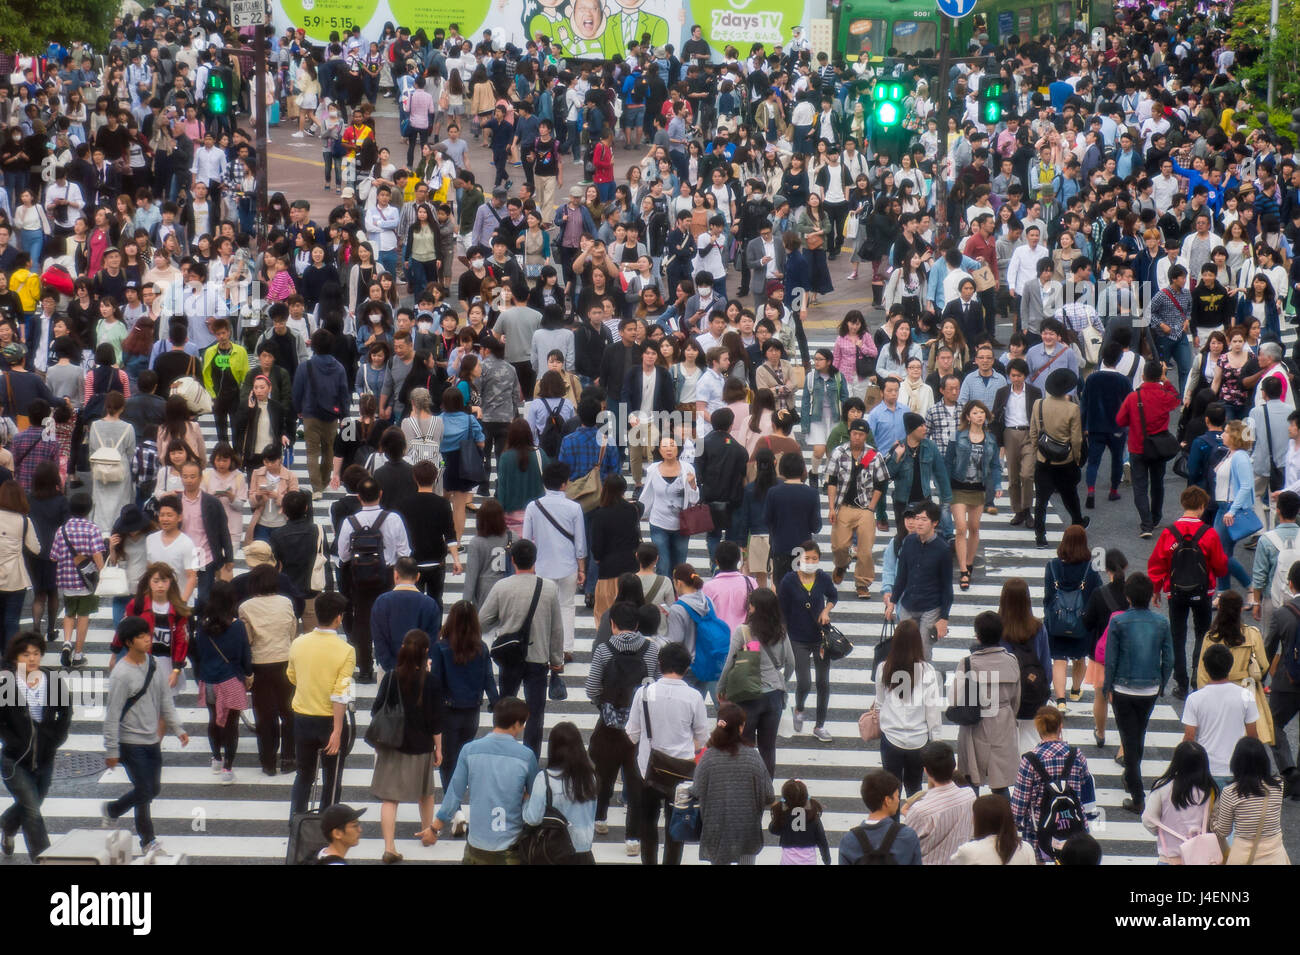 Shibuya crossing, the busiest road crossing in the world, Tokyo, Japan, Asia Stock Photo